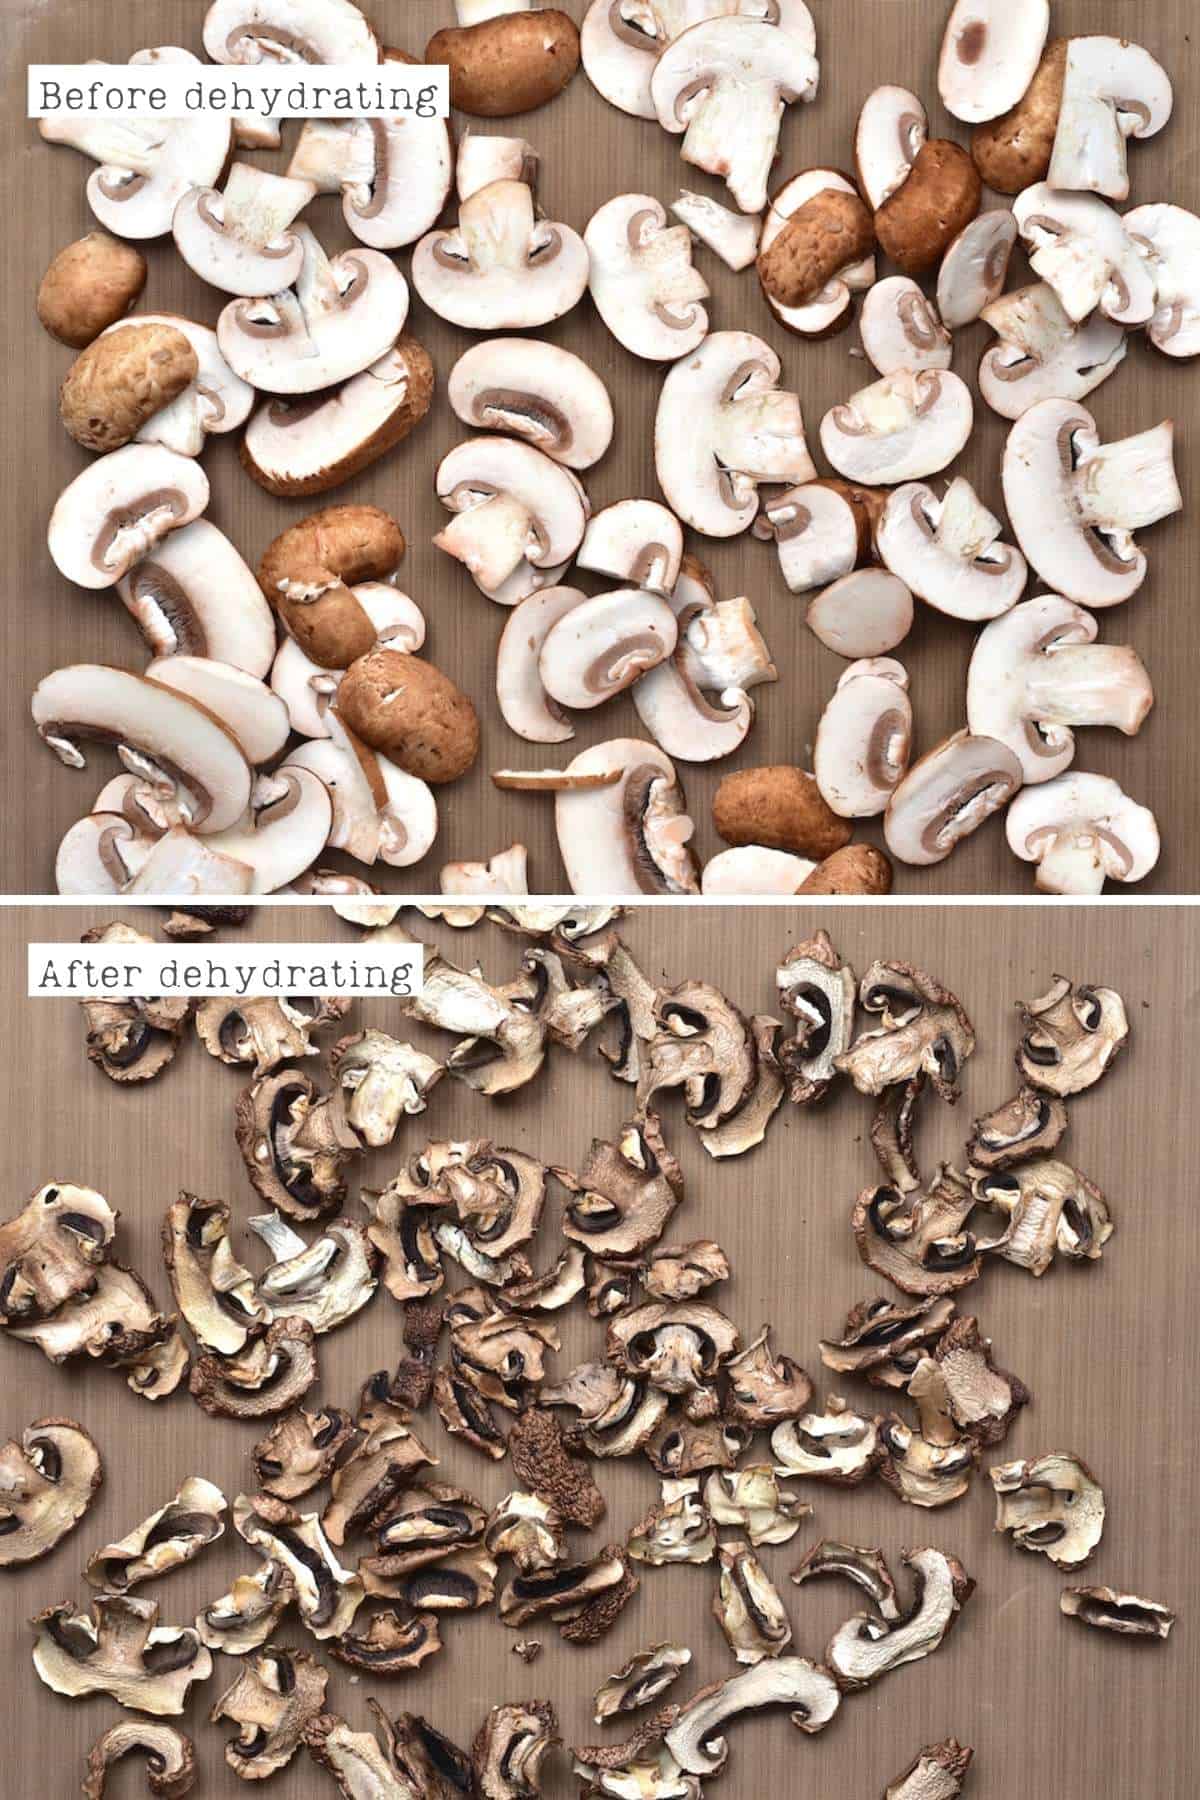 Before and after dehydrating mushrooms